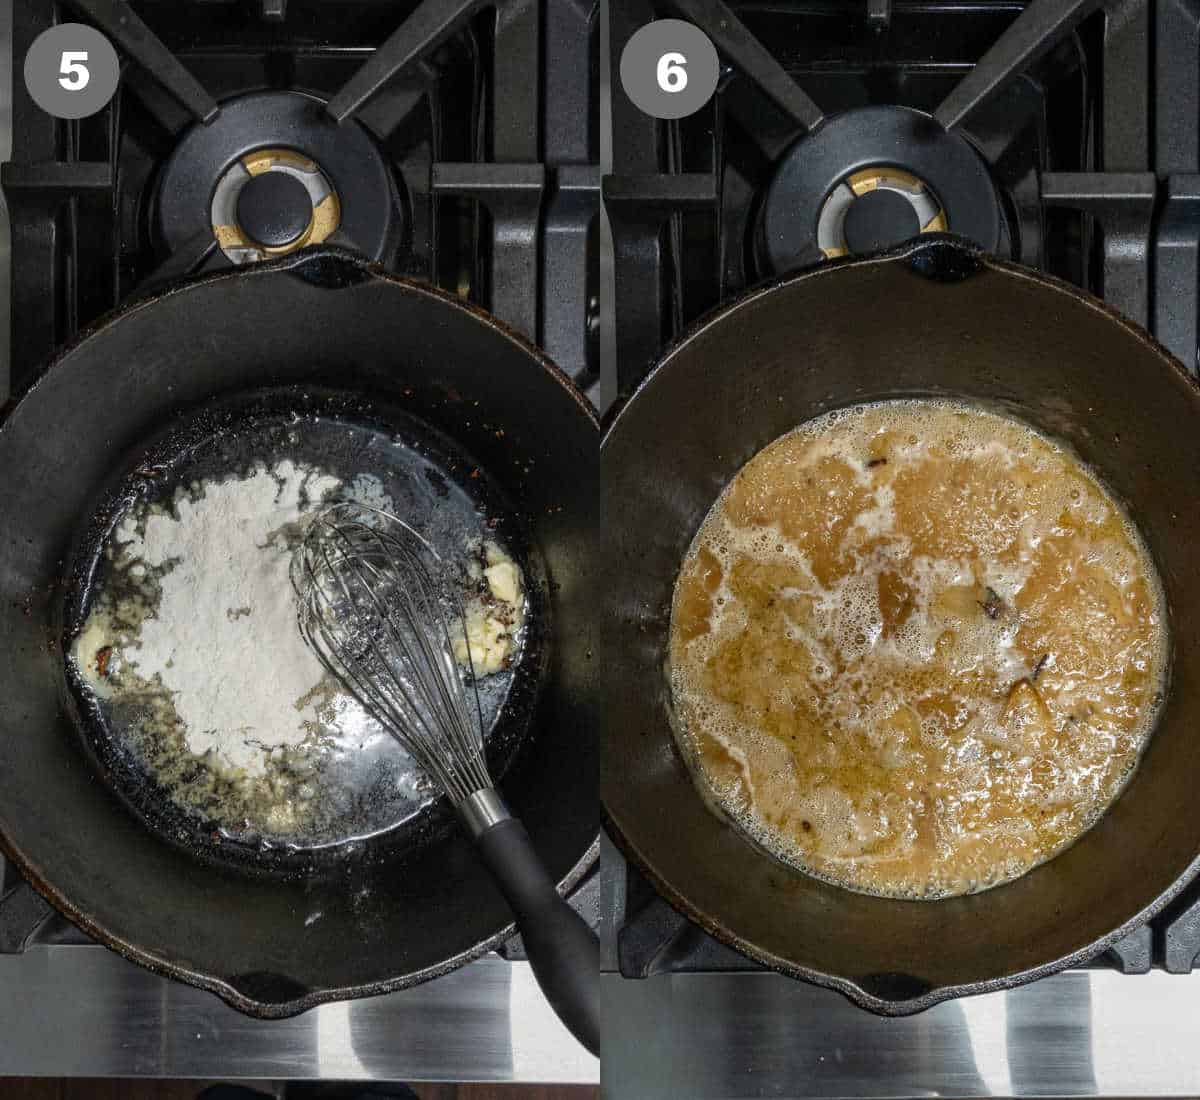 Flour and butter melted in a skillet then the strained liquid added into the skillet.